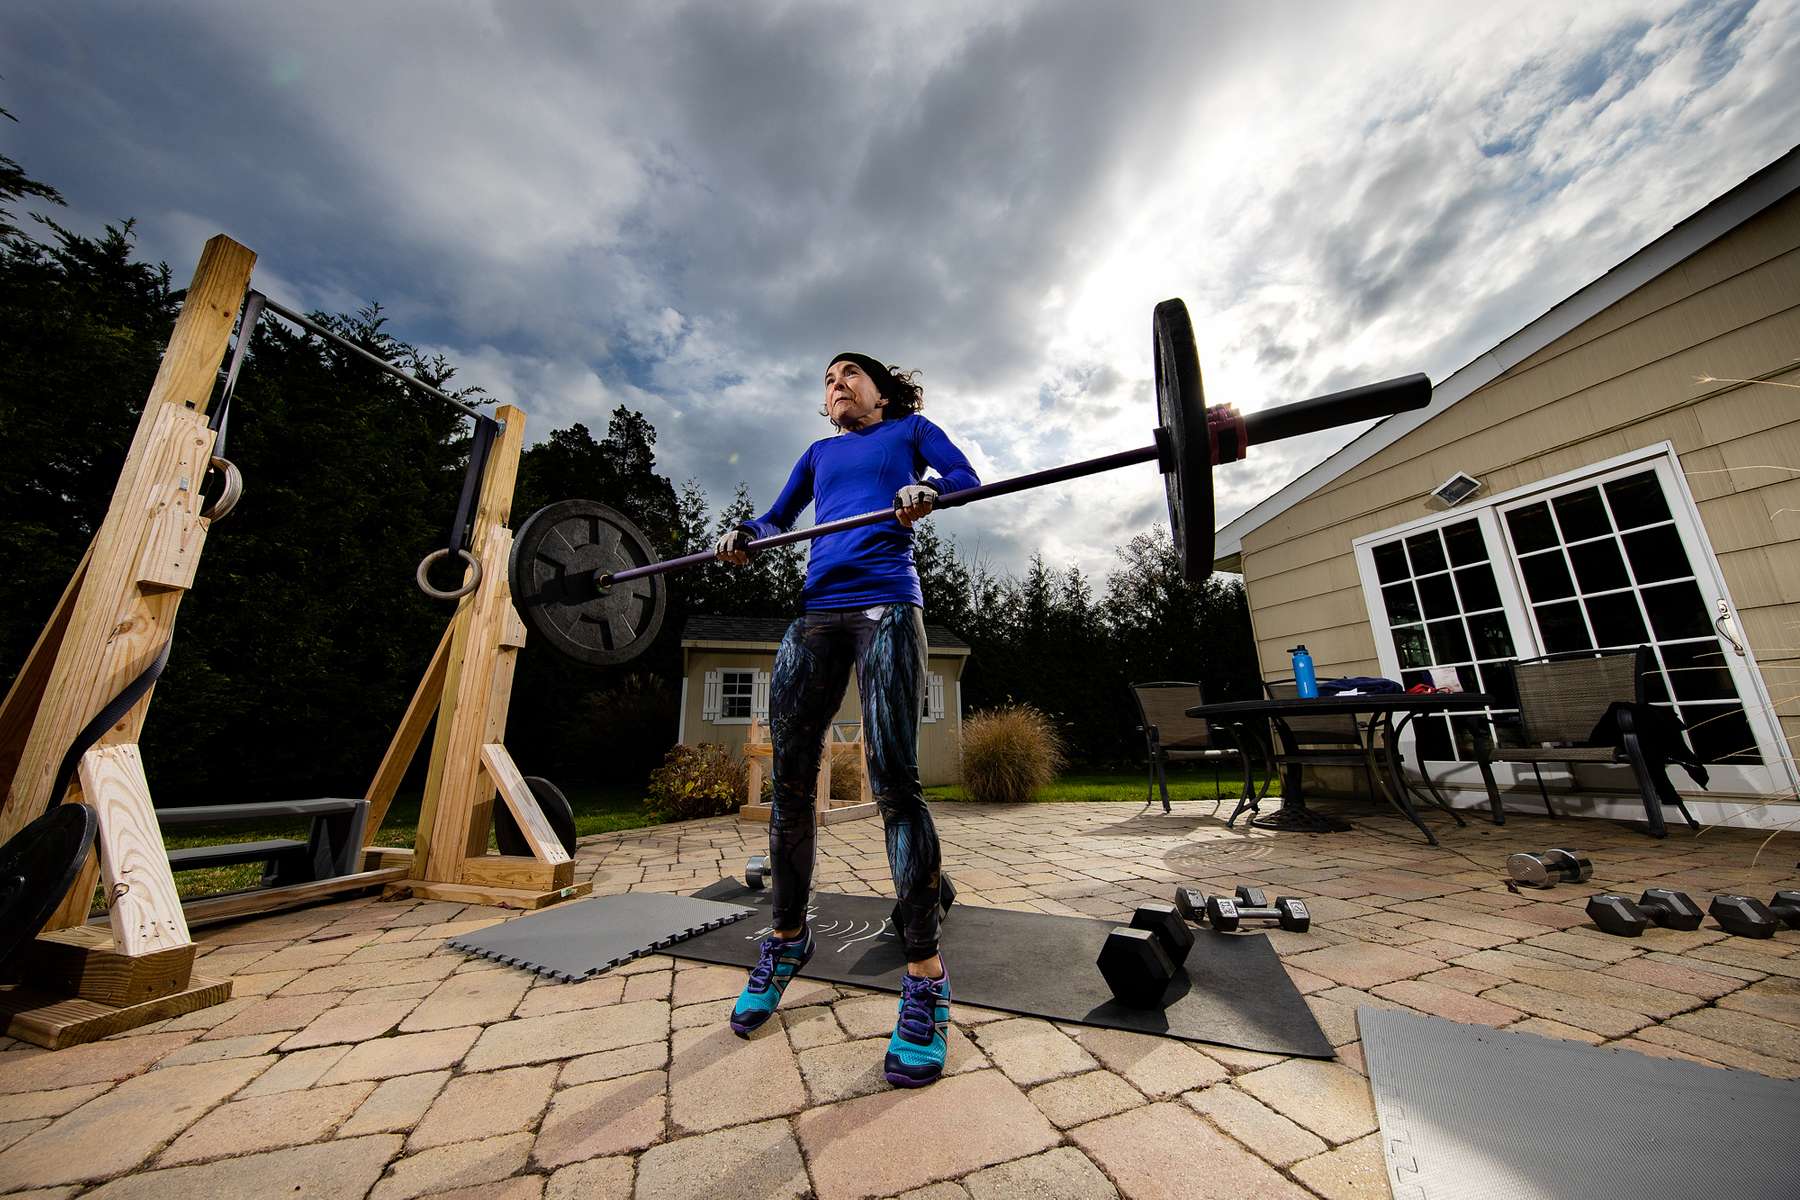 Debbie Krueger exercises in her backyard with her virtual Fitness Trainer Dennis Guerrero on November 17th, 2020 in Hewlett Harbor, New York.  In March of 2014, Dennis Guerrero and his business partner opened a gym on Long Island. The pair shared a passion for fitness, a dream of creating a local community of like-minded people and a willingness to take a risk. Over the next six years, hundreds of members experienced and embraced a unique environment that fostered a palpable energy, helping athletes of all ages and abilities reach their potential.  The gym became a place to share achievements, work through losses and overcome illness. But like so many other businesses, it seemingly had no way of overcoming the financial impact and ongoing uncertainty of a global pandemic. With the arrival of Covid-19, the gym shut its doors back in March, with no idea when it would reopen. The owners, though, were far from done. They lent out every piece of equipment they owned to the gym’s members, continued to pay their staff and worked to set up outdoor classes in hopes of keeping their membership active and healthy. As the shutdown stretched on, it became clear that the physical gym was closed for good.  They have since reinvented themselves and are now called Life Outside the Box.  Their business model has changed drastically, and all their workouts have gone virtual.  The workouts are conducted by a small group of fitness trainers led by Guerrero.  The members pay a monthly fee and can take live Zoom fitness classes.  They are coached by the virtual trainers in real time.  More and more people have reconstructed their garages, spare rooms, backyards, and basements into home gyms since the COVID-19 pandemic hit the United States.  